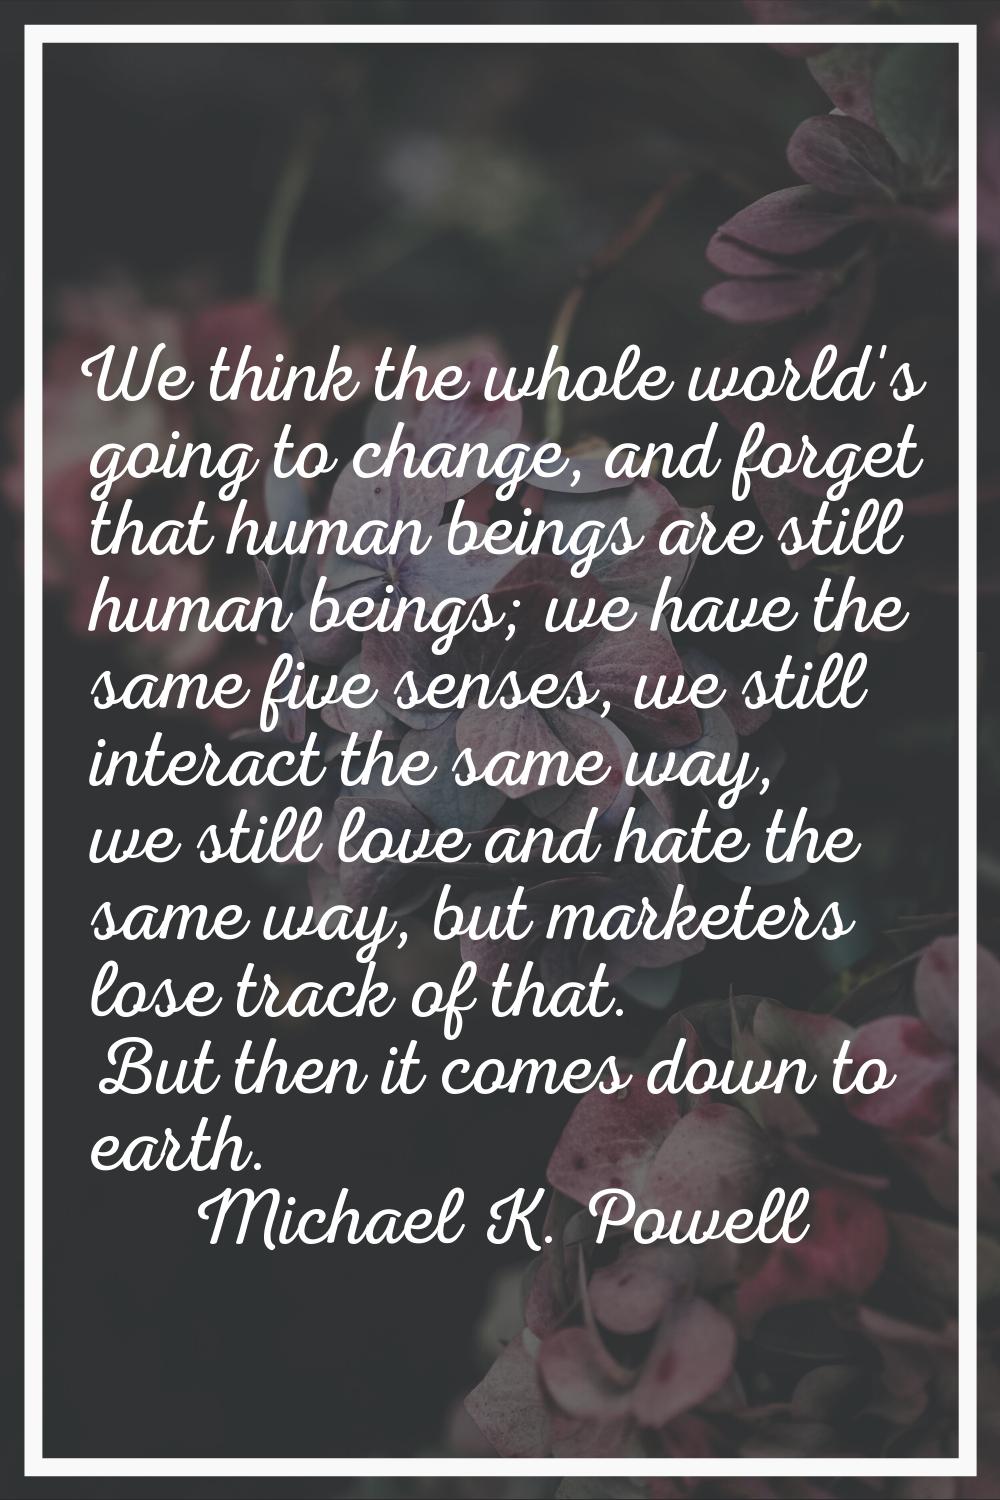 We think the whole world's going to change, and forget that human beings are still human beings; we